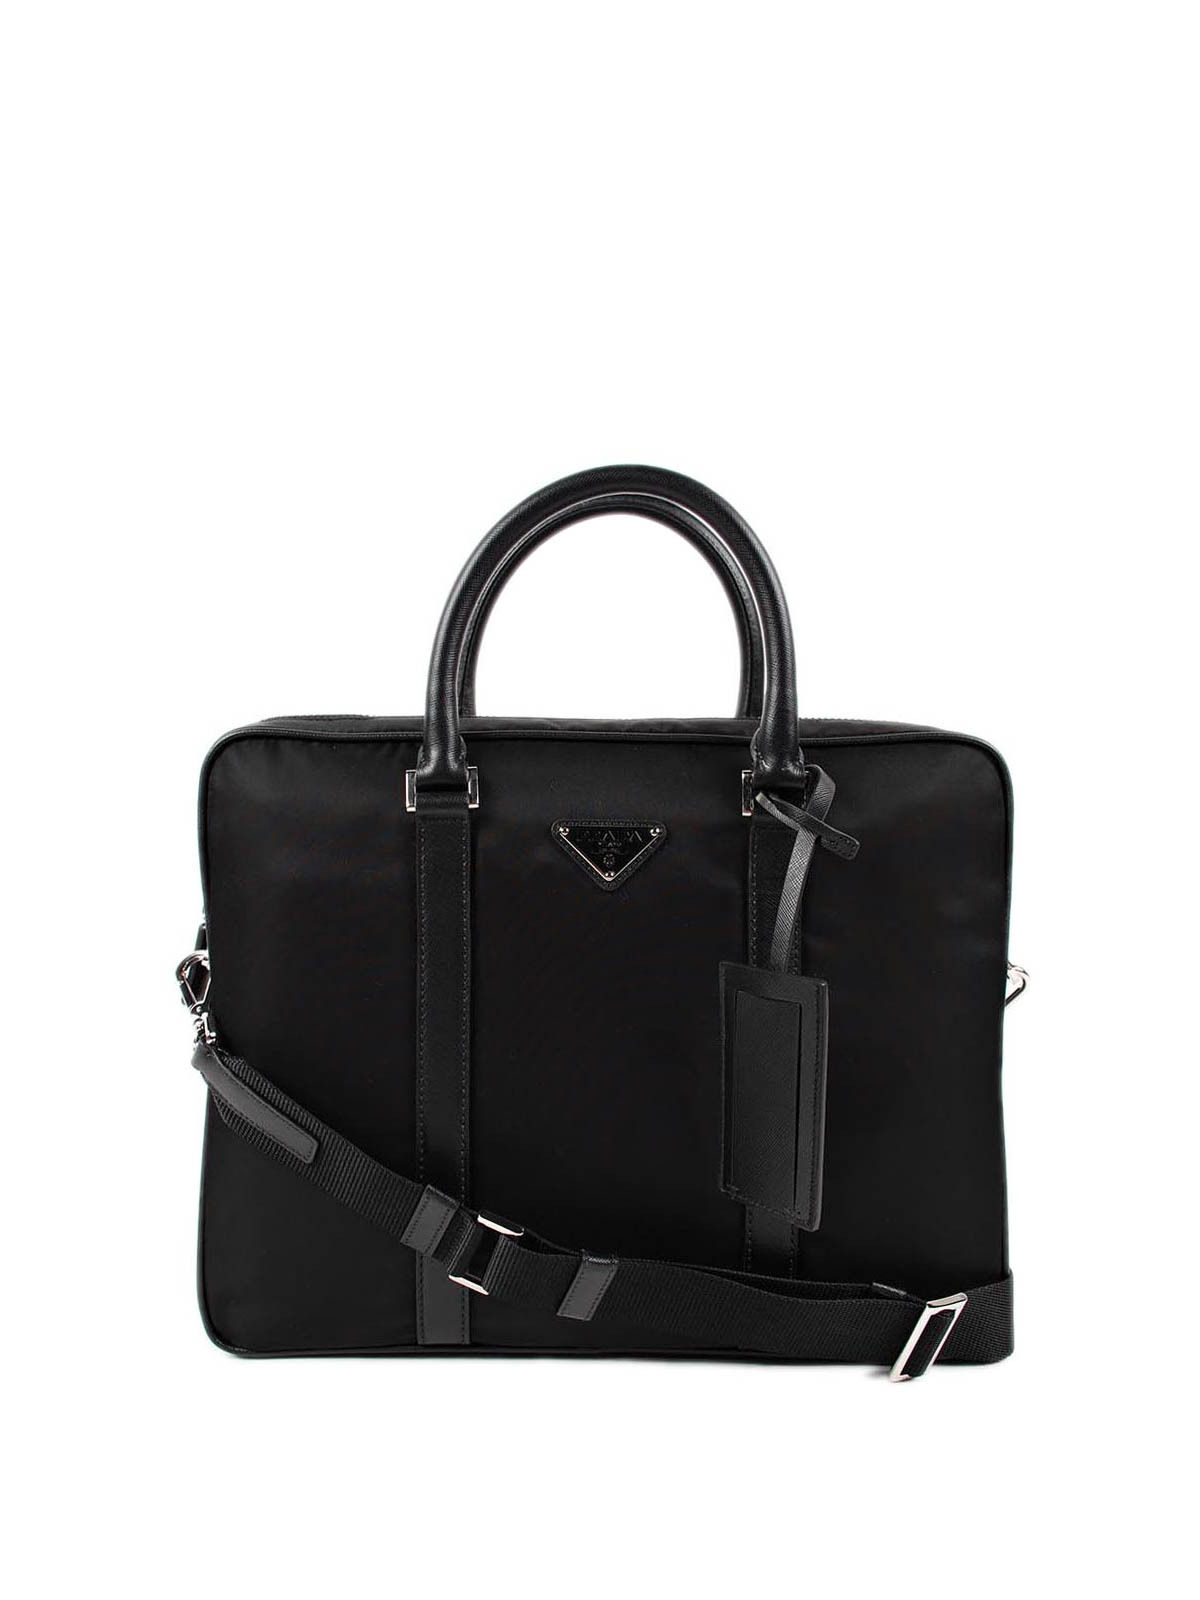 Laptop bags & briefcases Prada - Nylon and leather laptop bag ...